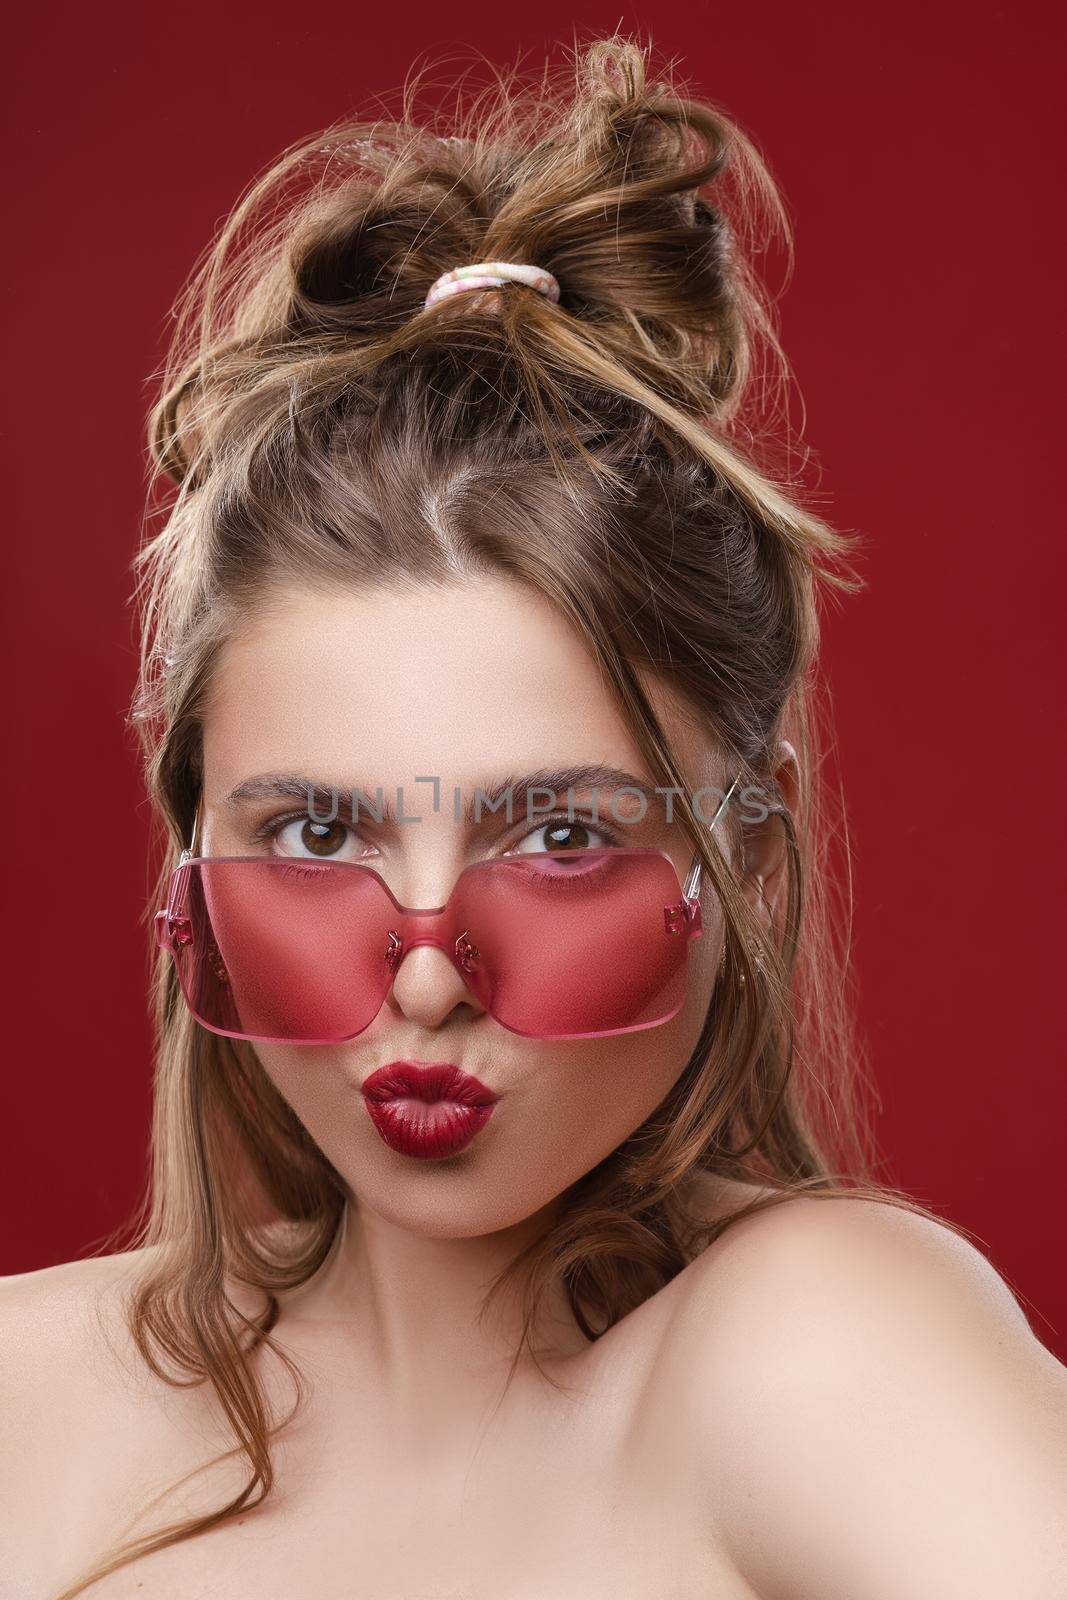 Fashion portrait of stunning young girl with messy hairstyle wearing trendy red or pink sunglasses and red lips. Red color concept. Sunglasses match lips and background.